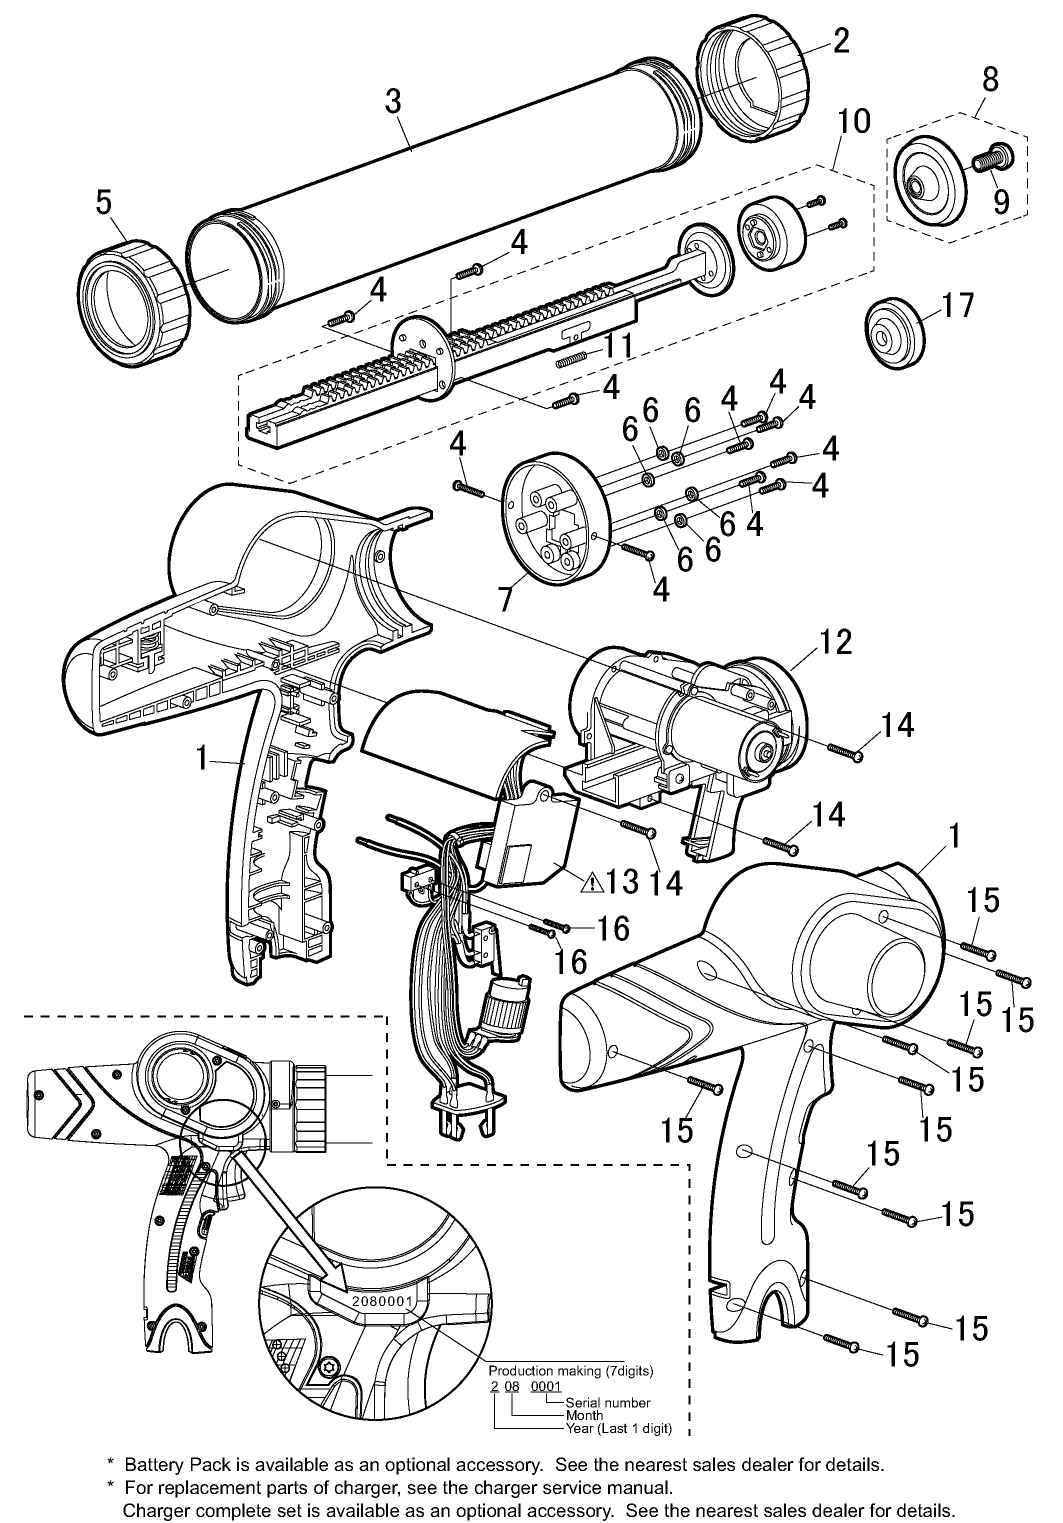 EY3610: Exploded View